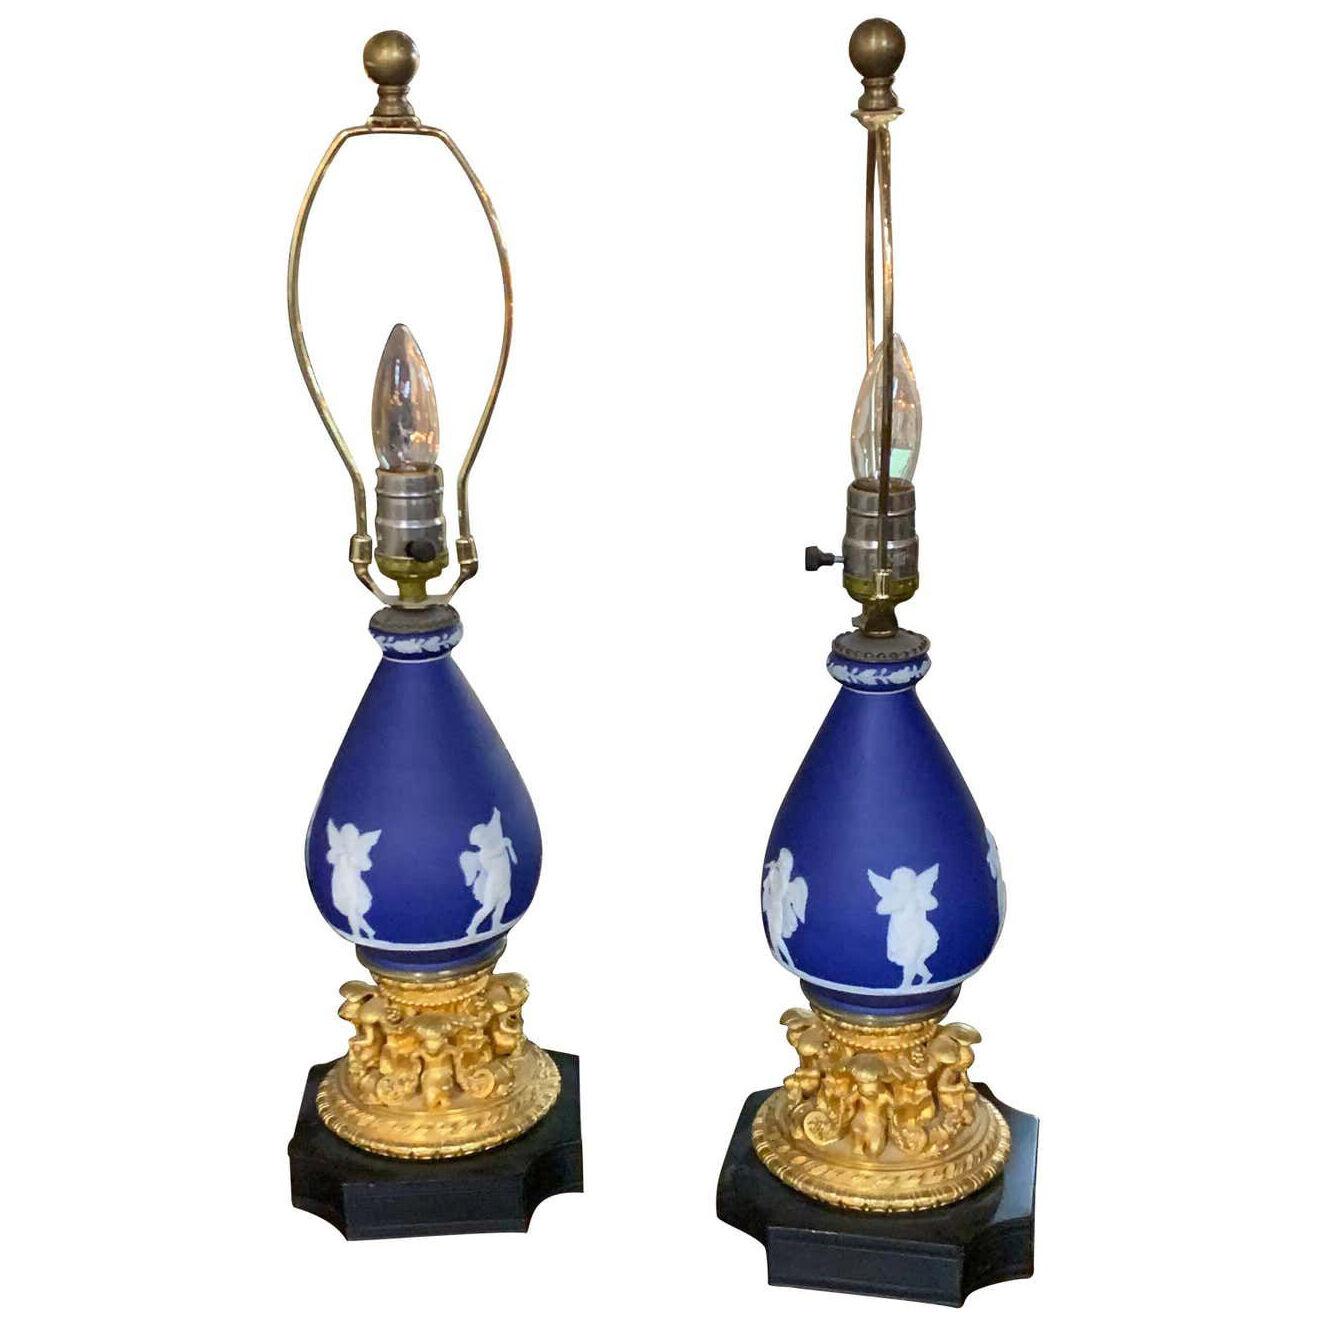 Pair of French Doré Bronze and Wedgewood Cherub Form Lamps